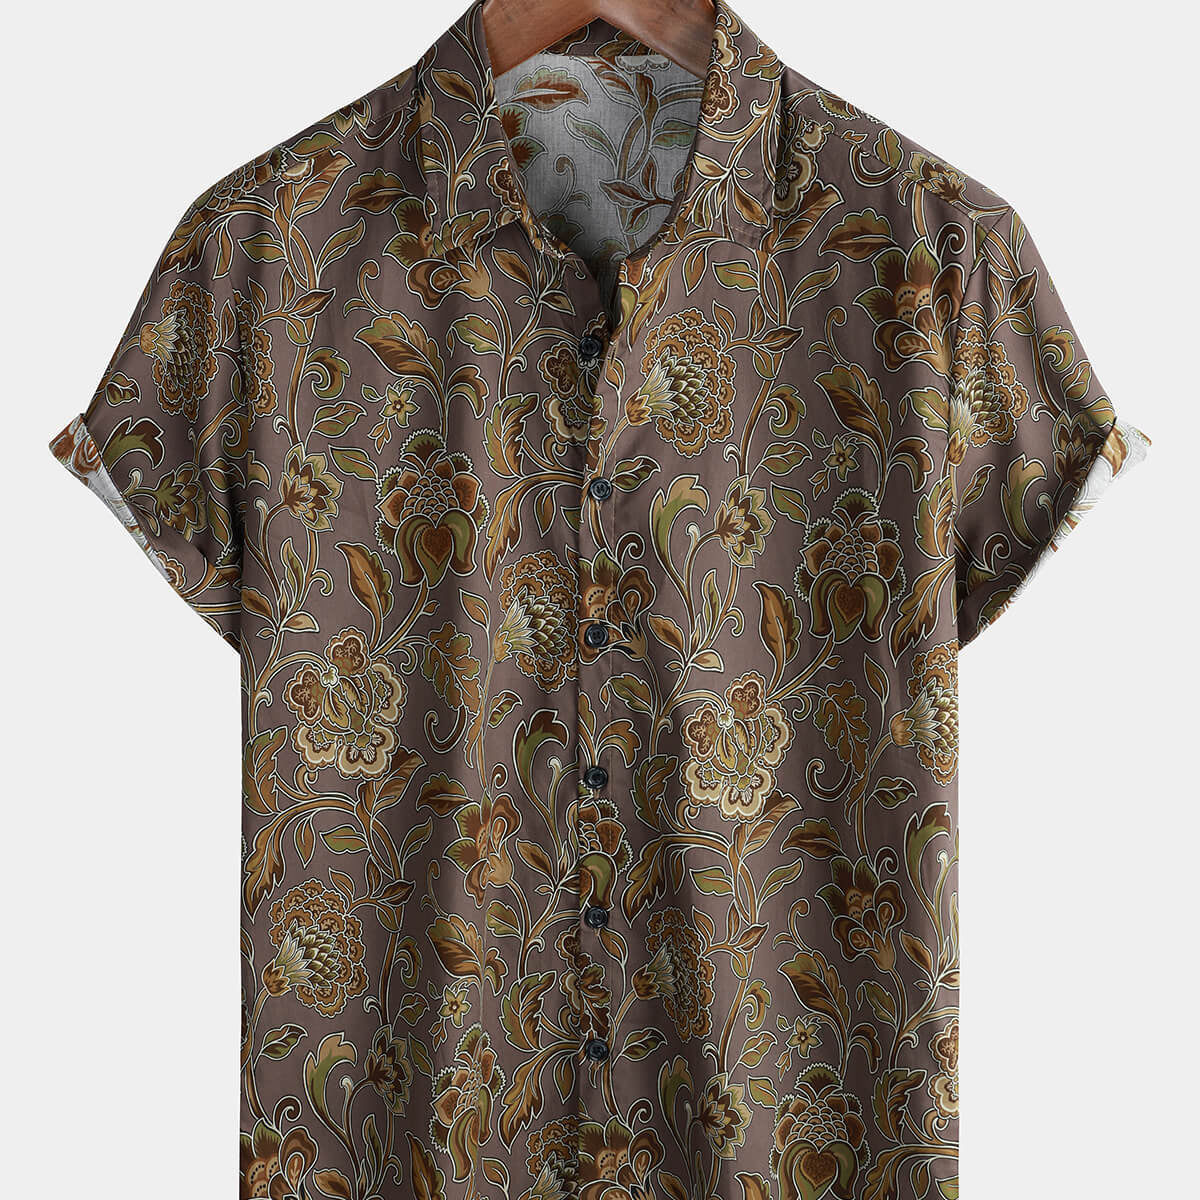 Men's Vintage Floral Holiday Casual Brown Short Sleeve Button Up Shirt